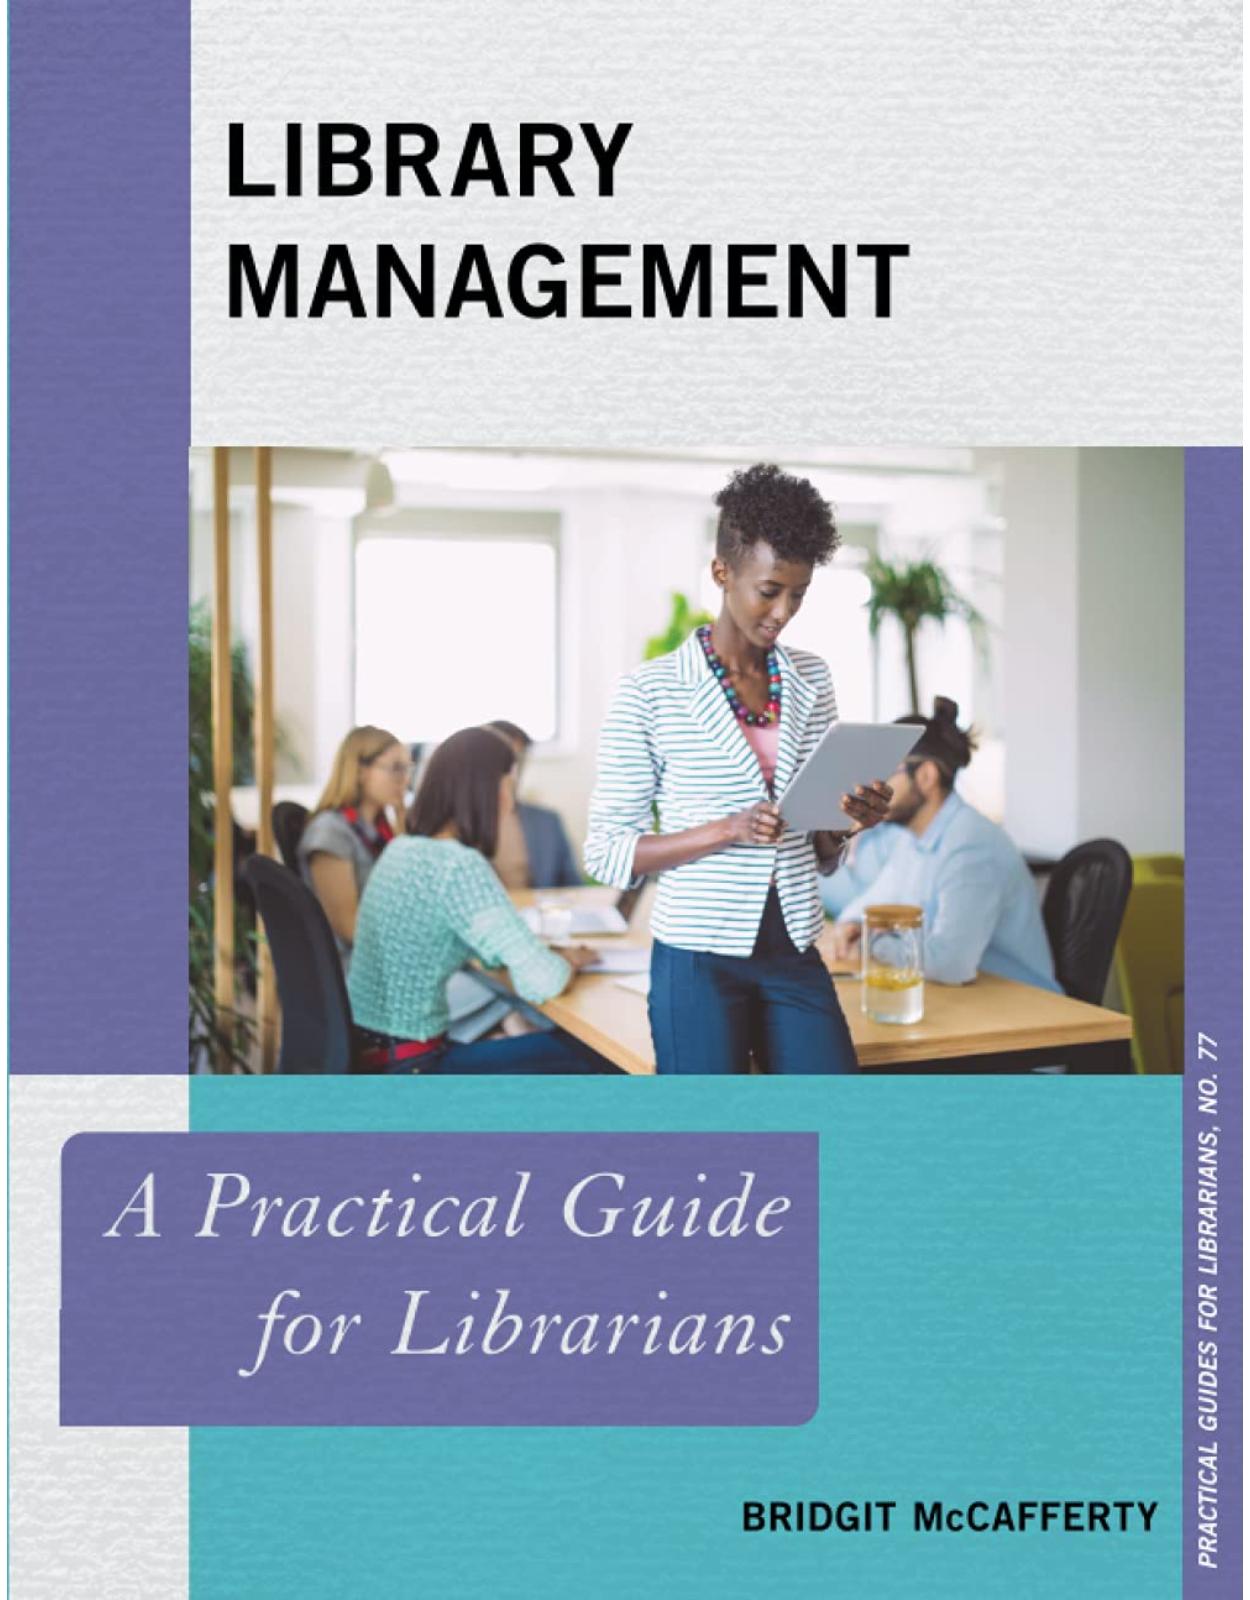 Library Management: A Practical Guide for Librarians: 77 (Practical Guides for Librarians) 